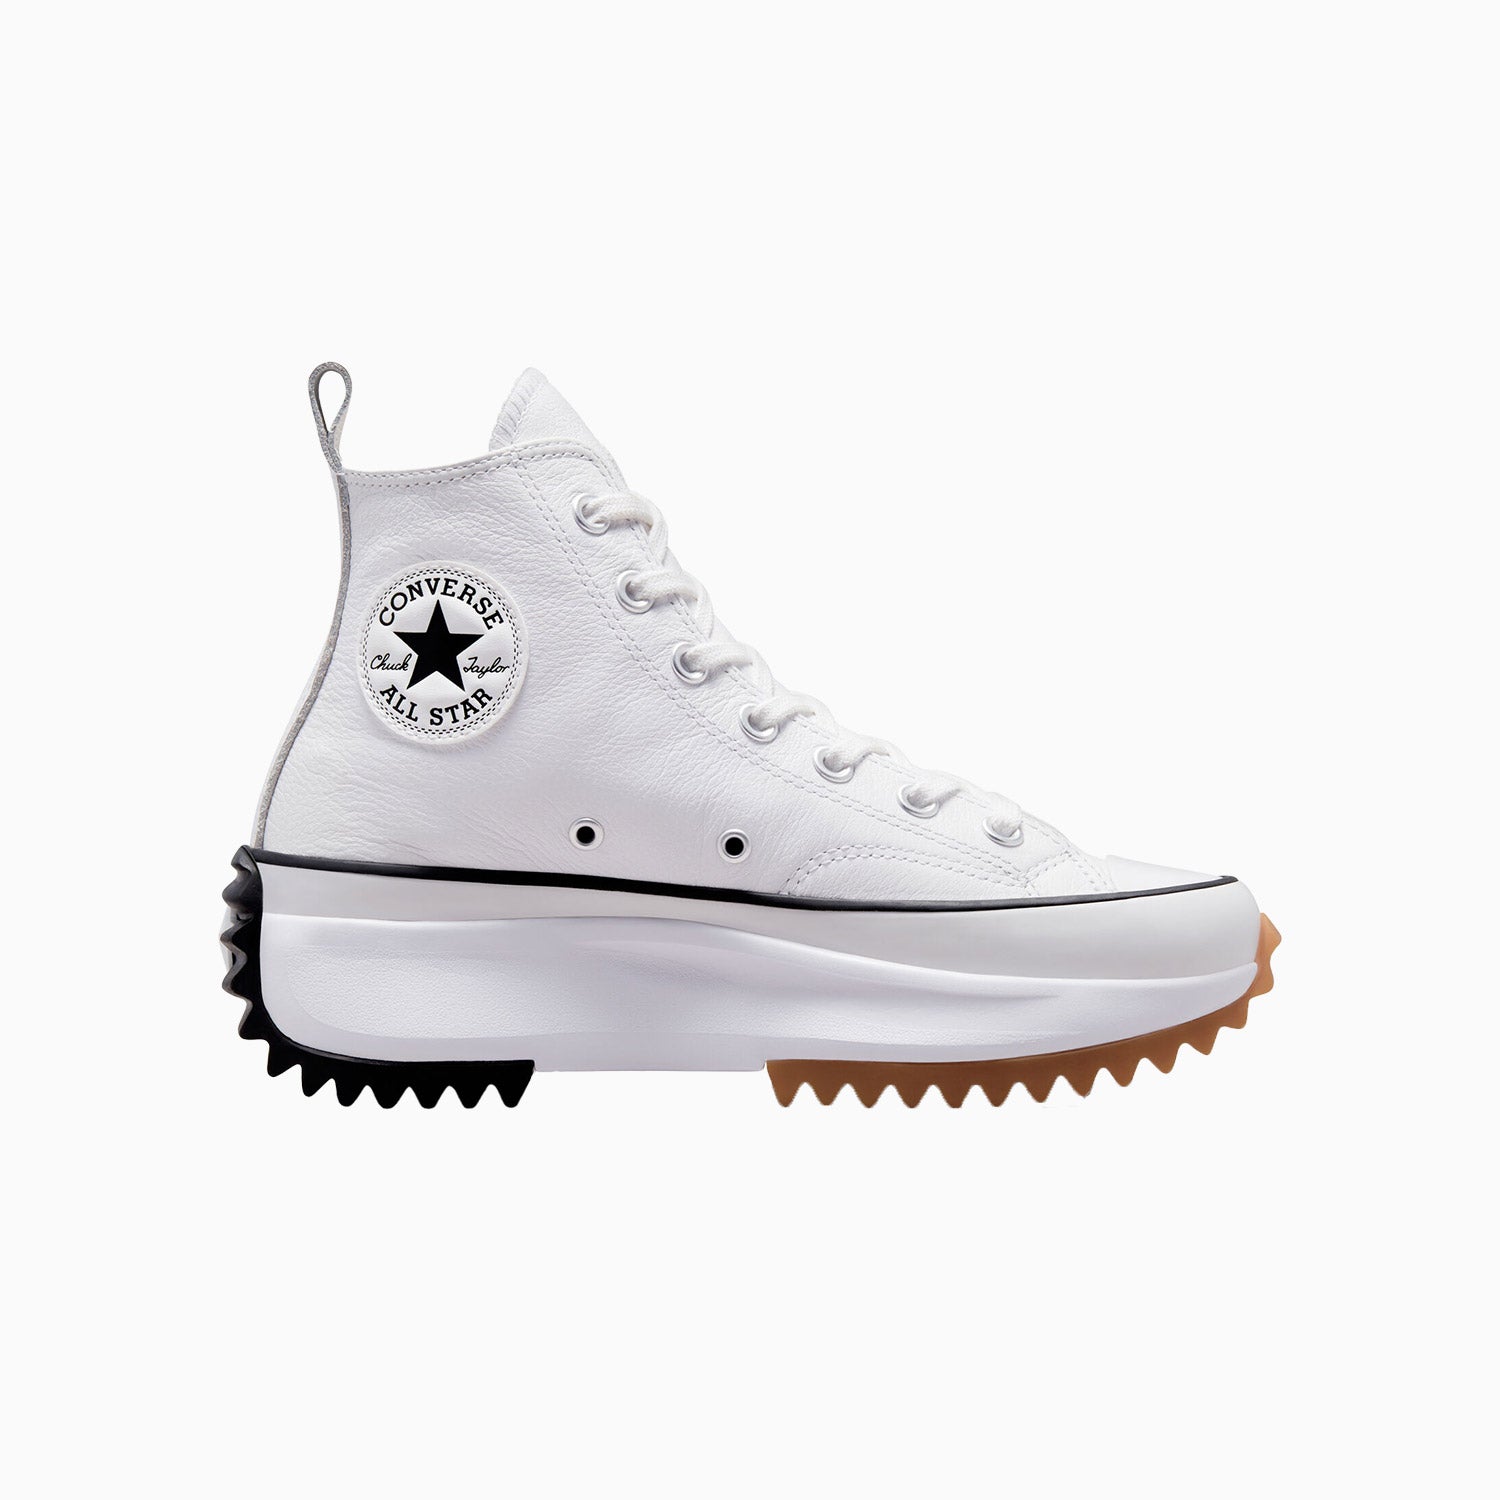 converse-run-star-hike-platform-foundational-leather-shoes-a04293c